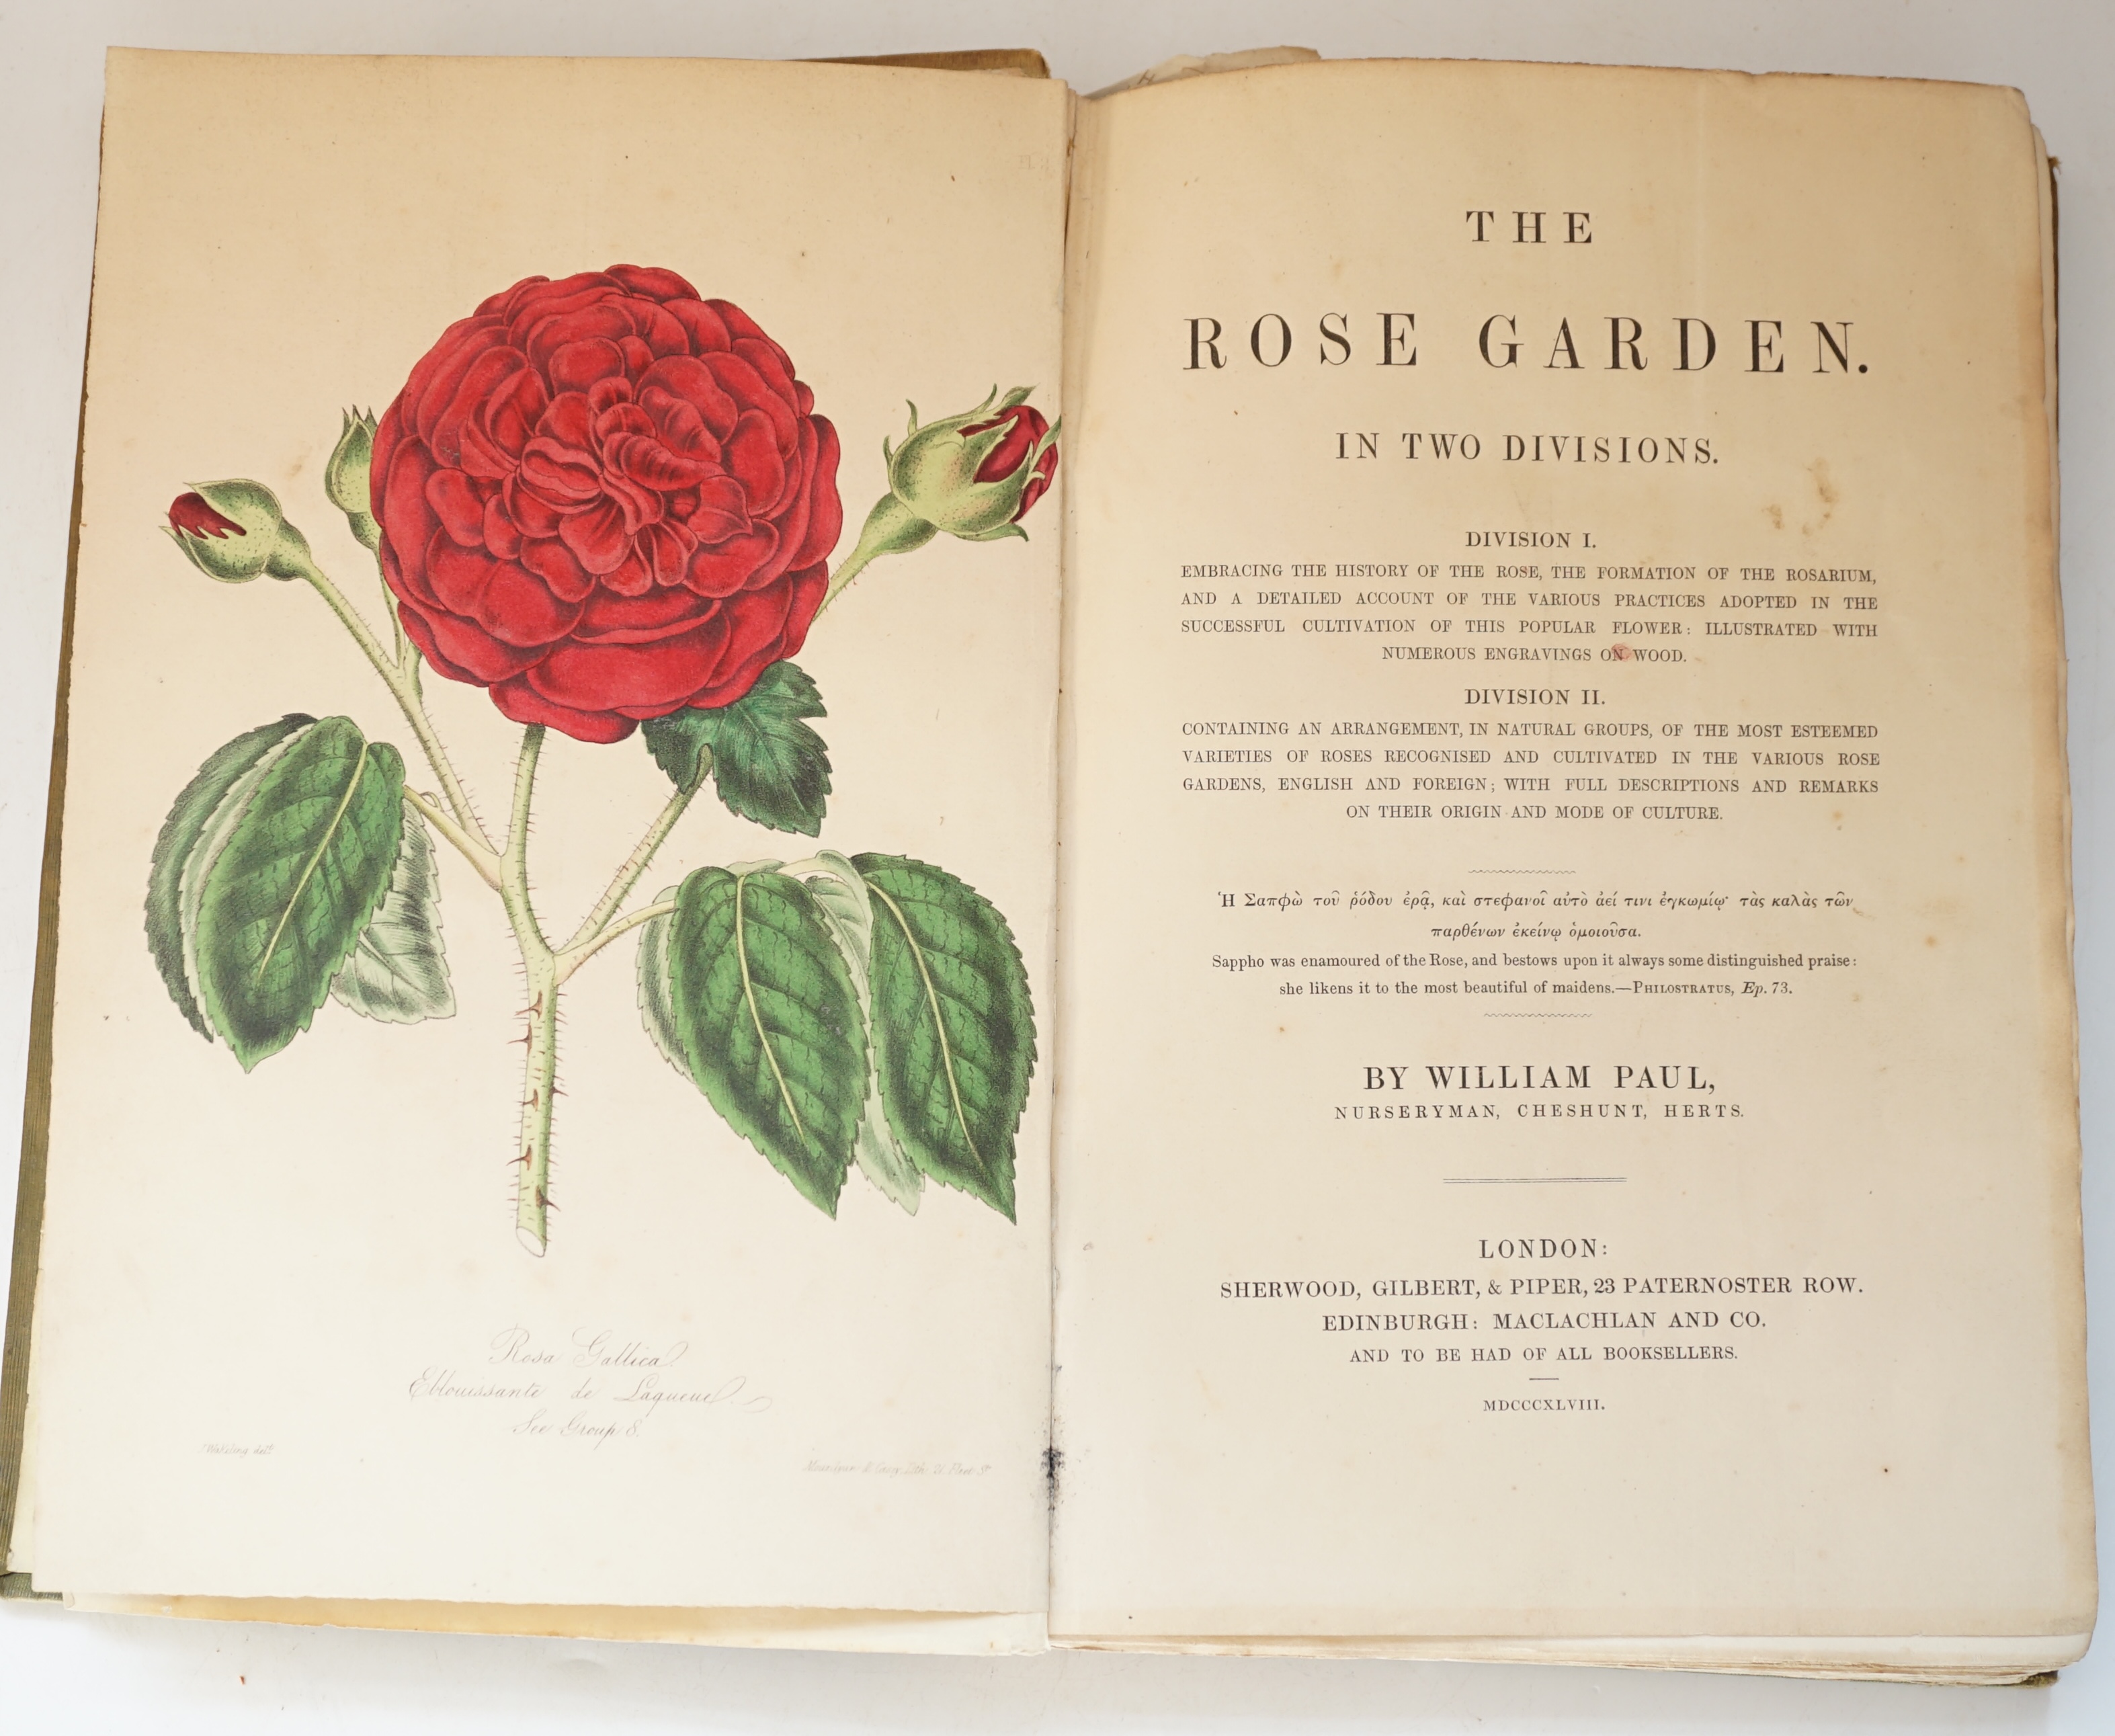 Paul, William - The Rose Garden. In Two Divisions, 1st edition, 15 hand-coloured lithographed plates, tissue-guarded, 8vo, publisher's embossed cloth gilt, spine browned and chipped, Sherwood, Gilbert and Piper, London,